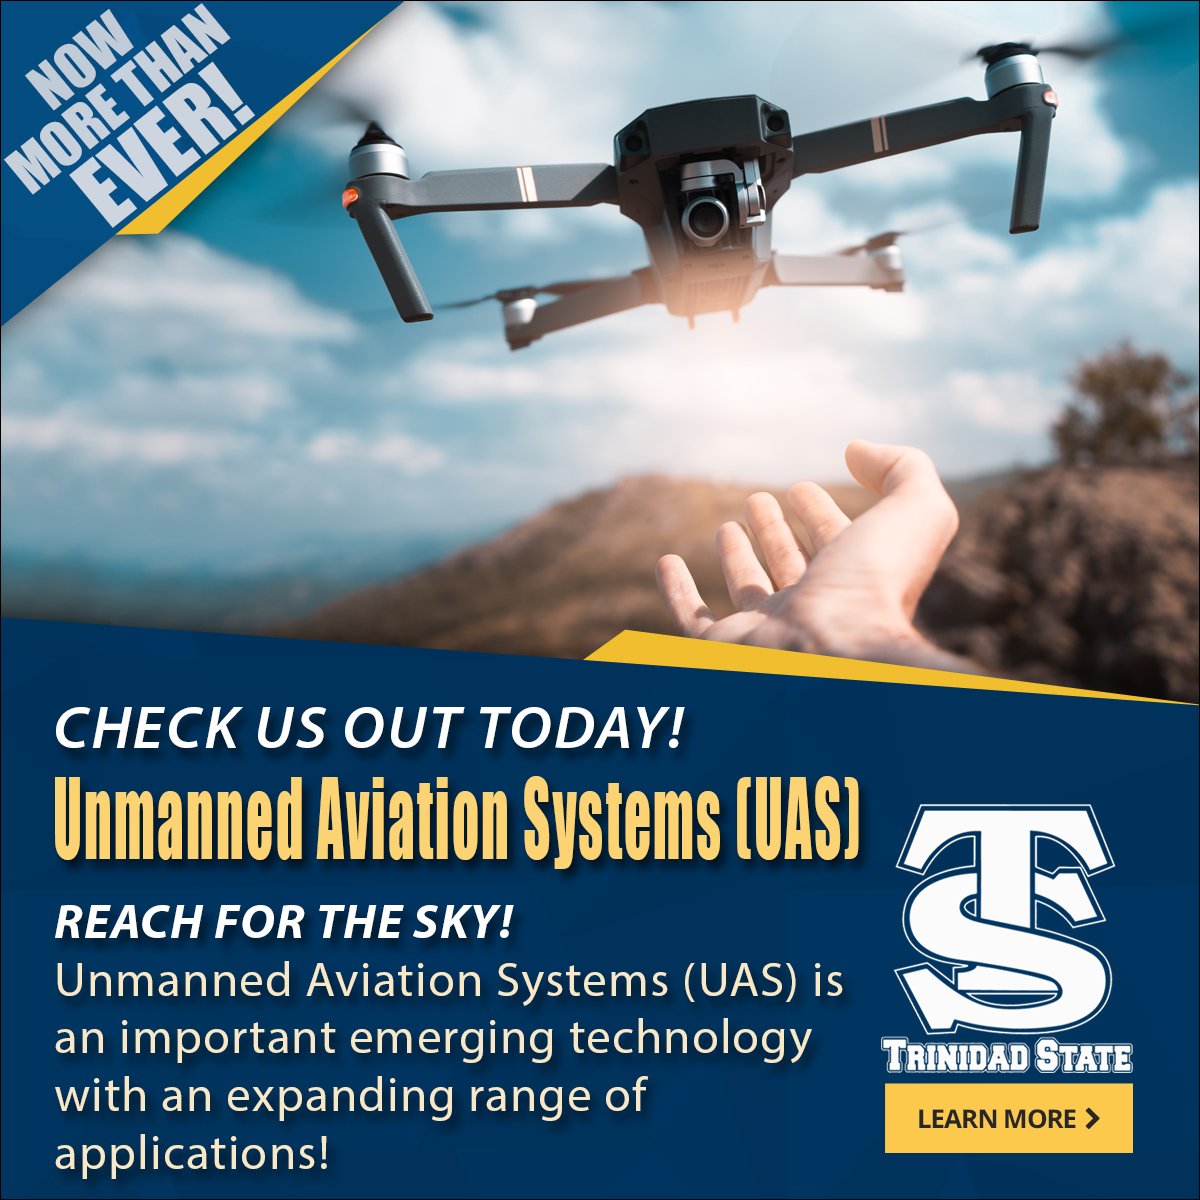 dekorere Anoi samarbejde trinidadstate on Twitter: "Drone Pilot! The Trinidad State UAS program  focuses on training an upcoming and needed workforce to become safe and  proficient pilots. Become certified and acquire hands-on flight experience  to